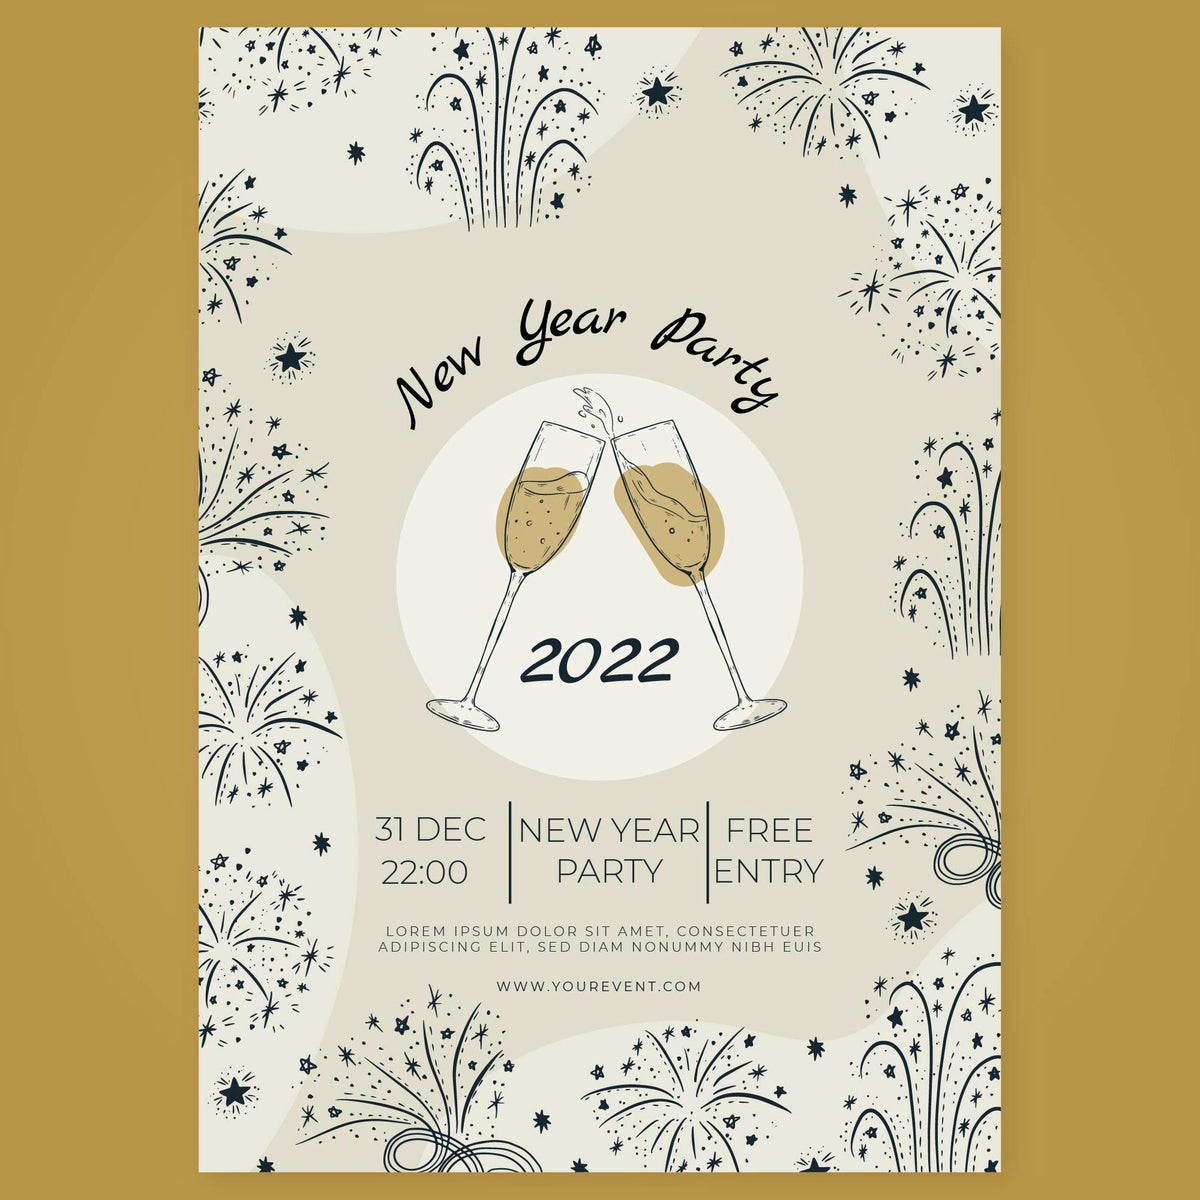 Plantable Blissful New Year Eco Greetings & Party Invitations